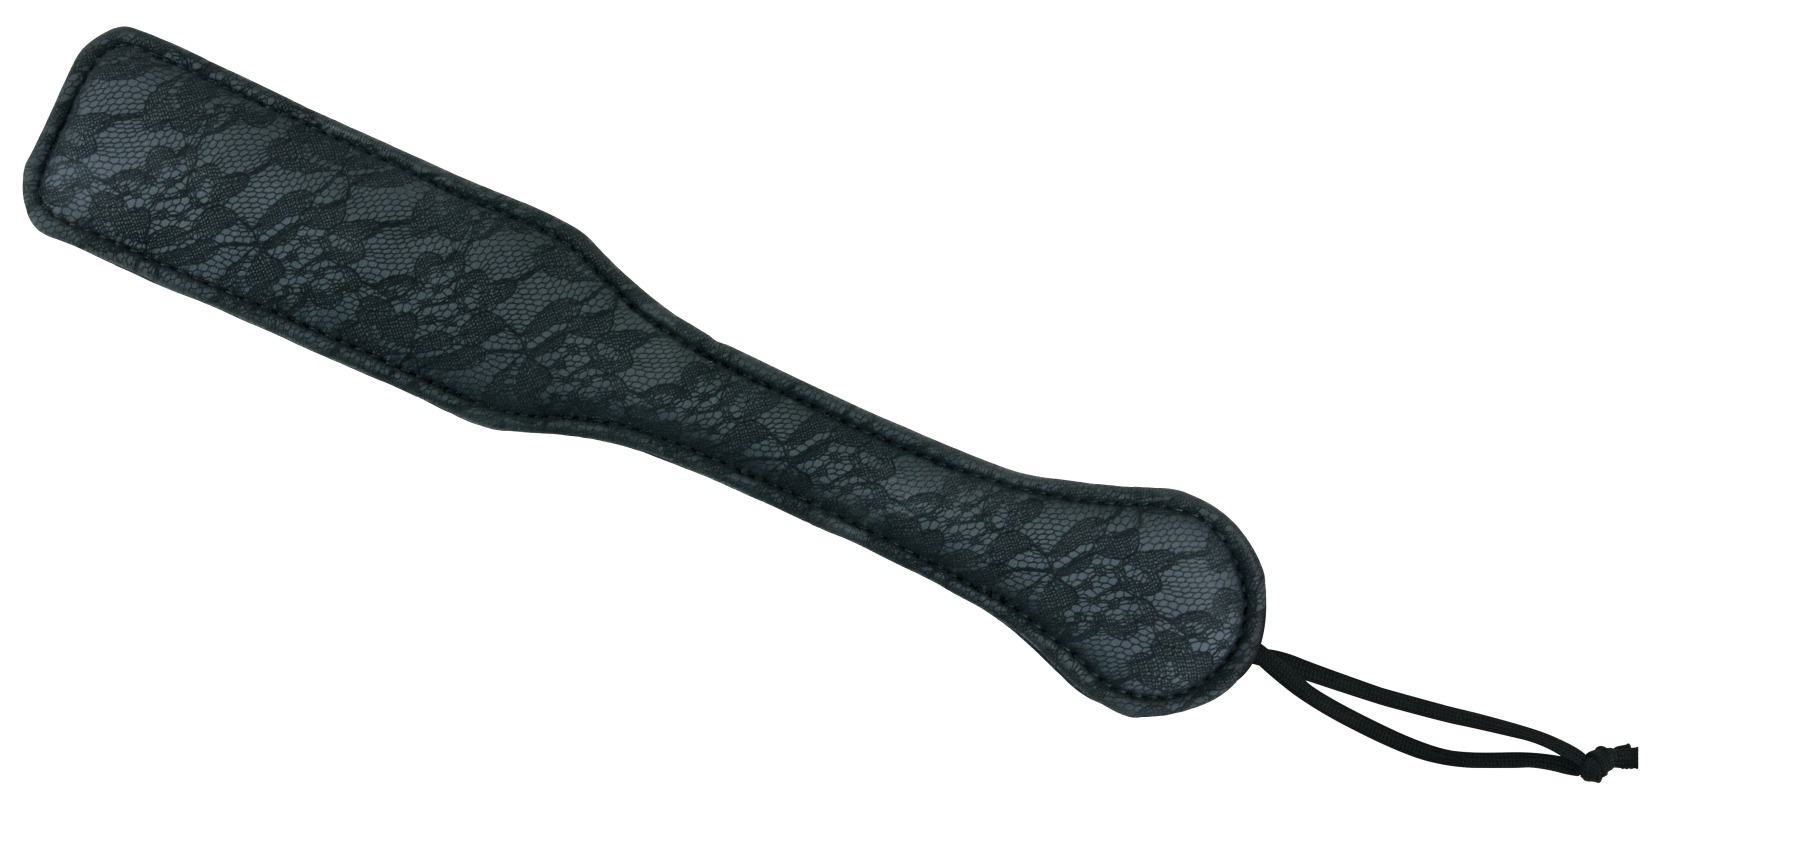  Sportsheets Midnight Lace Paddle